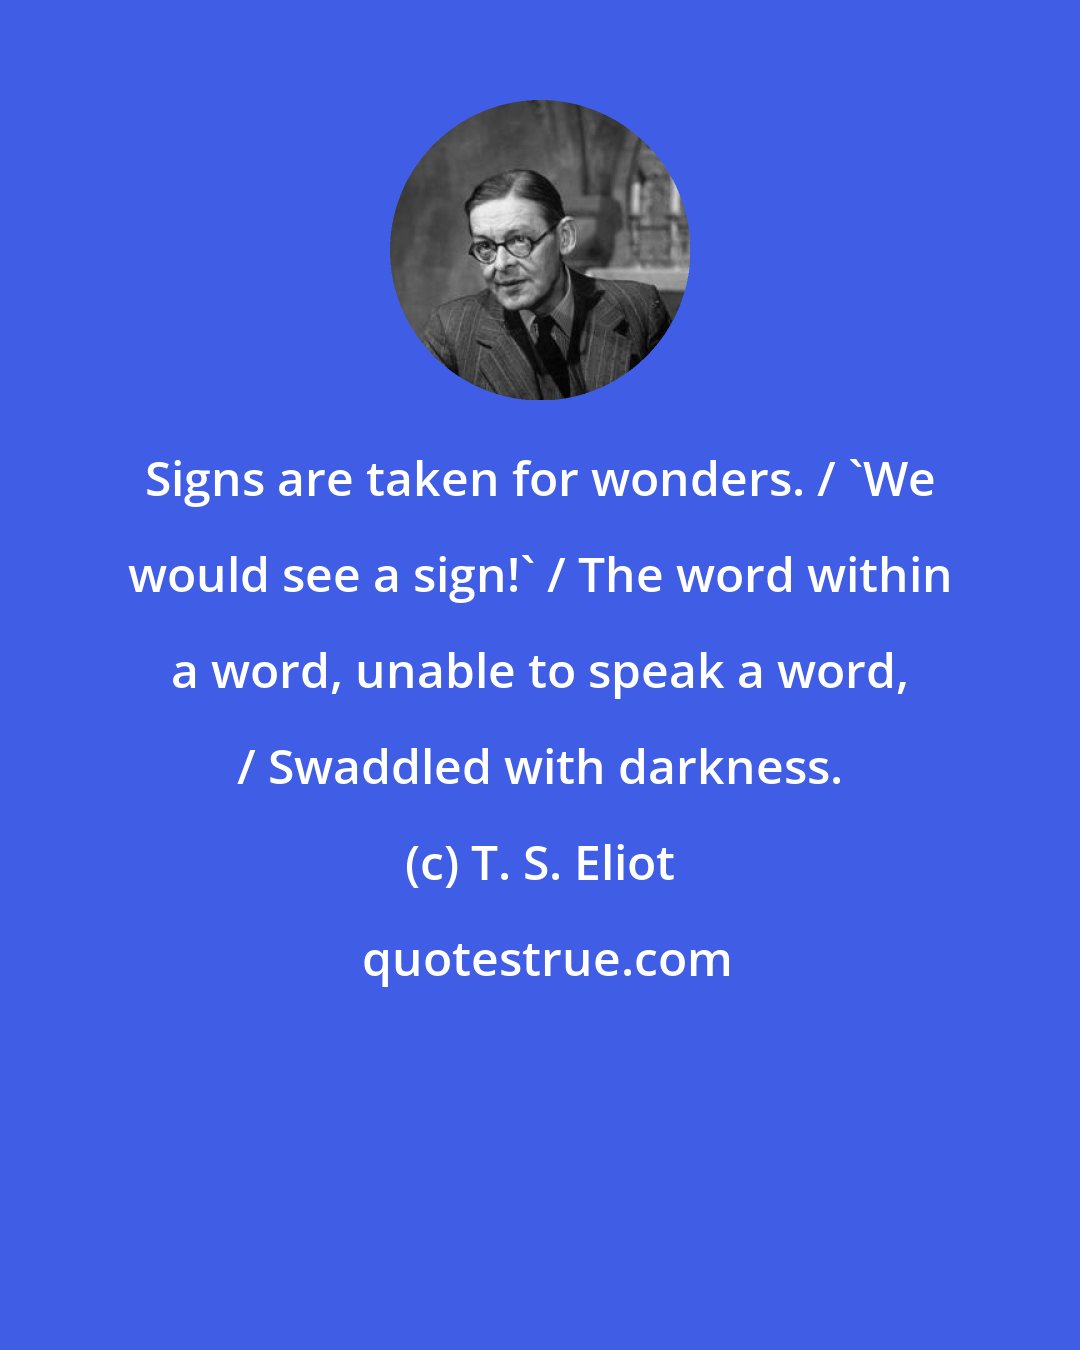 T. S. Eliot: Signs are taken for wonders. / 'We would see a sign!' / The word within a word, unable to speak a word, / Swaddled with darkness.